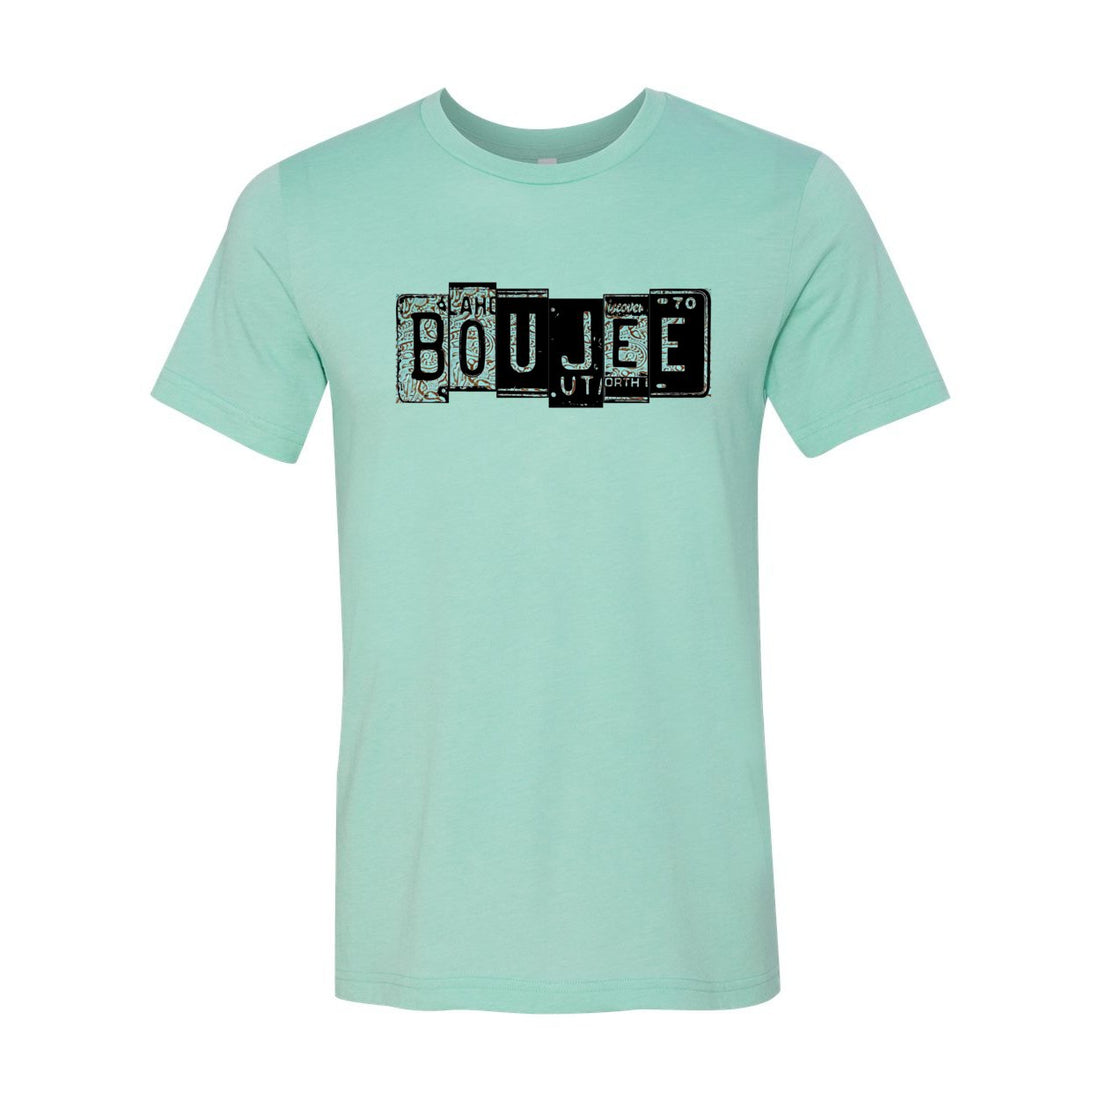 Boujee Plates Jersey Tee - T-Shirts - Positively Sassy - Boujee Plates Jersey Tee